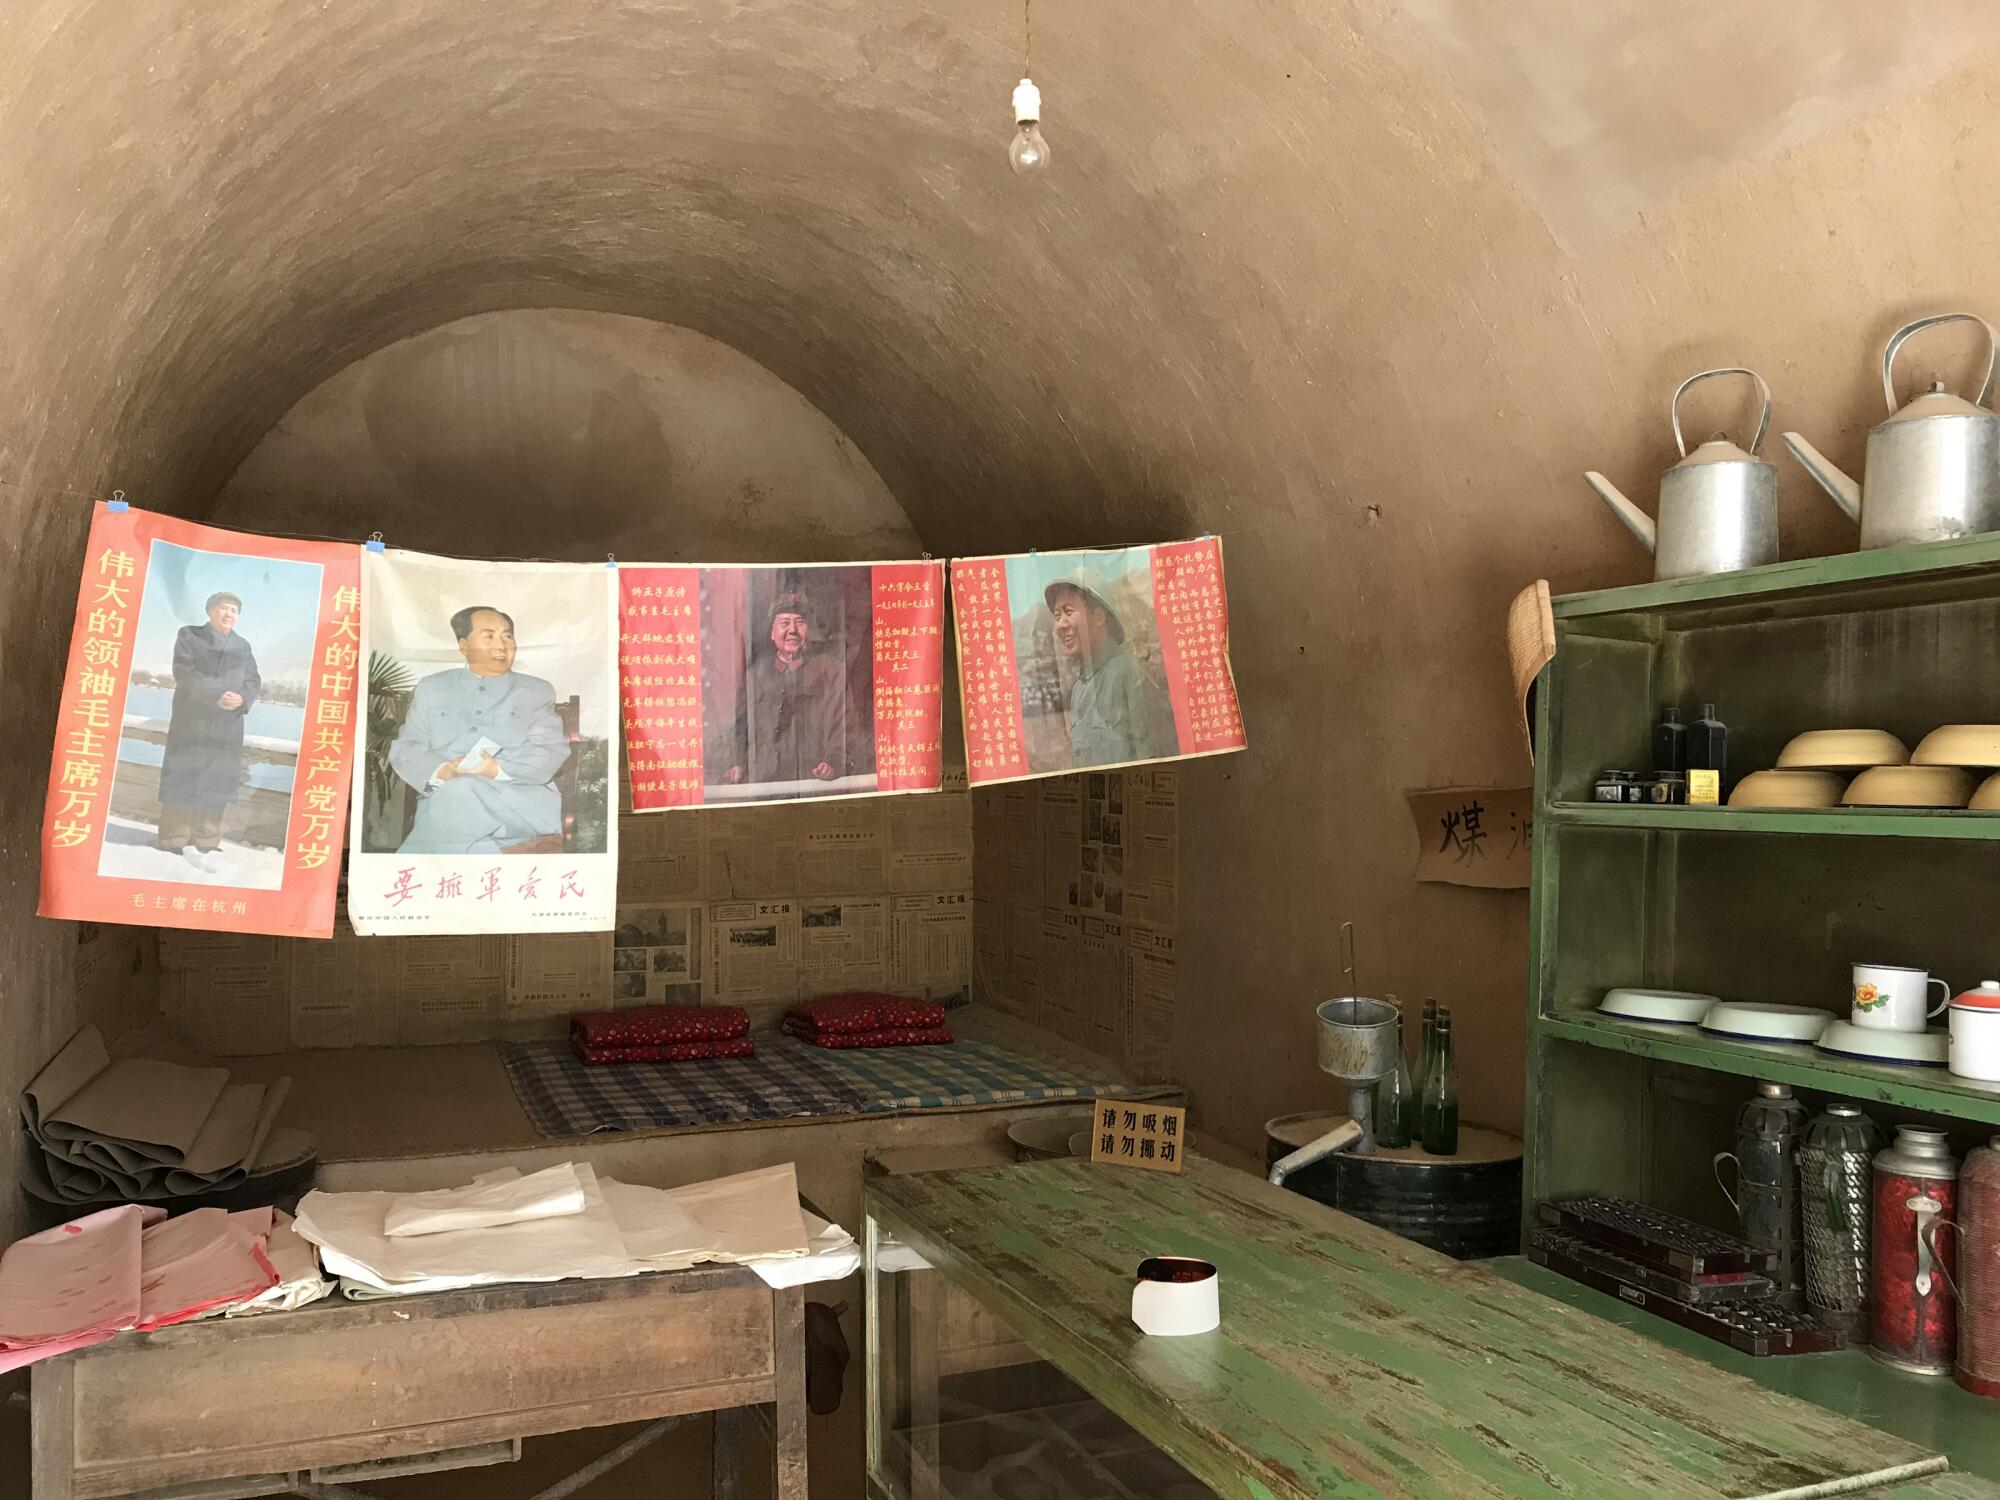 Posters of Mao Zedong hang a cave.